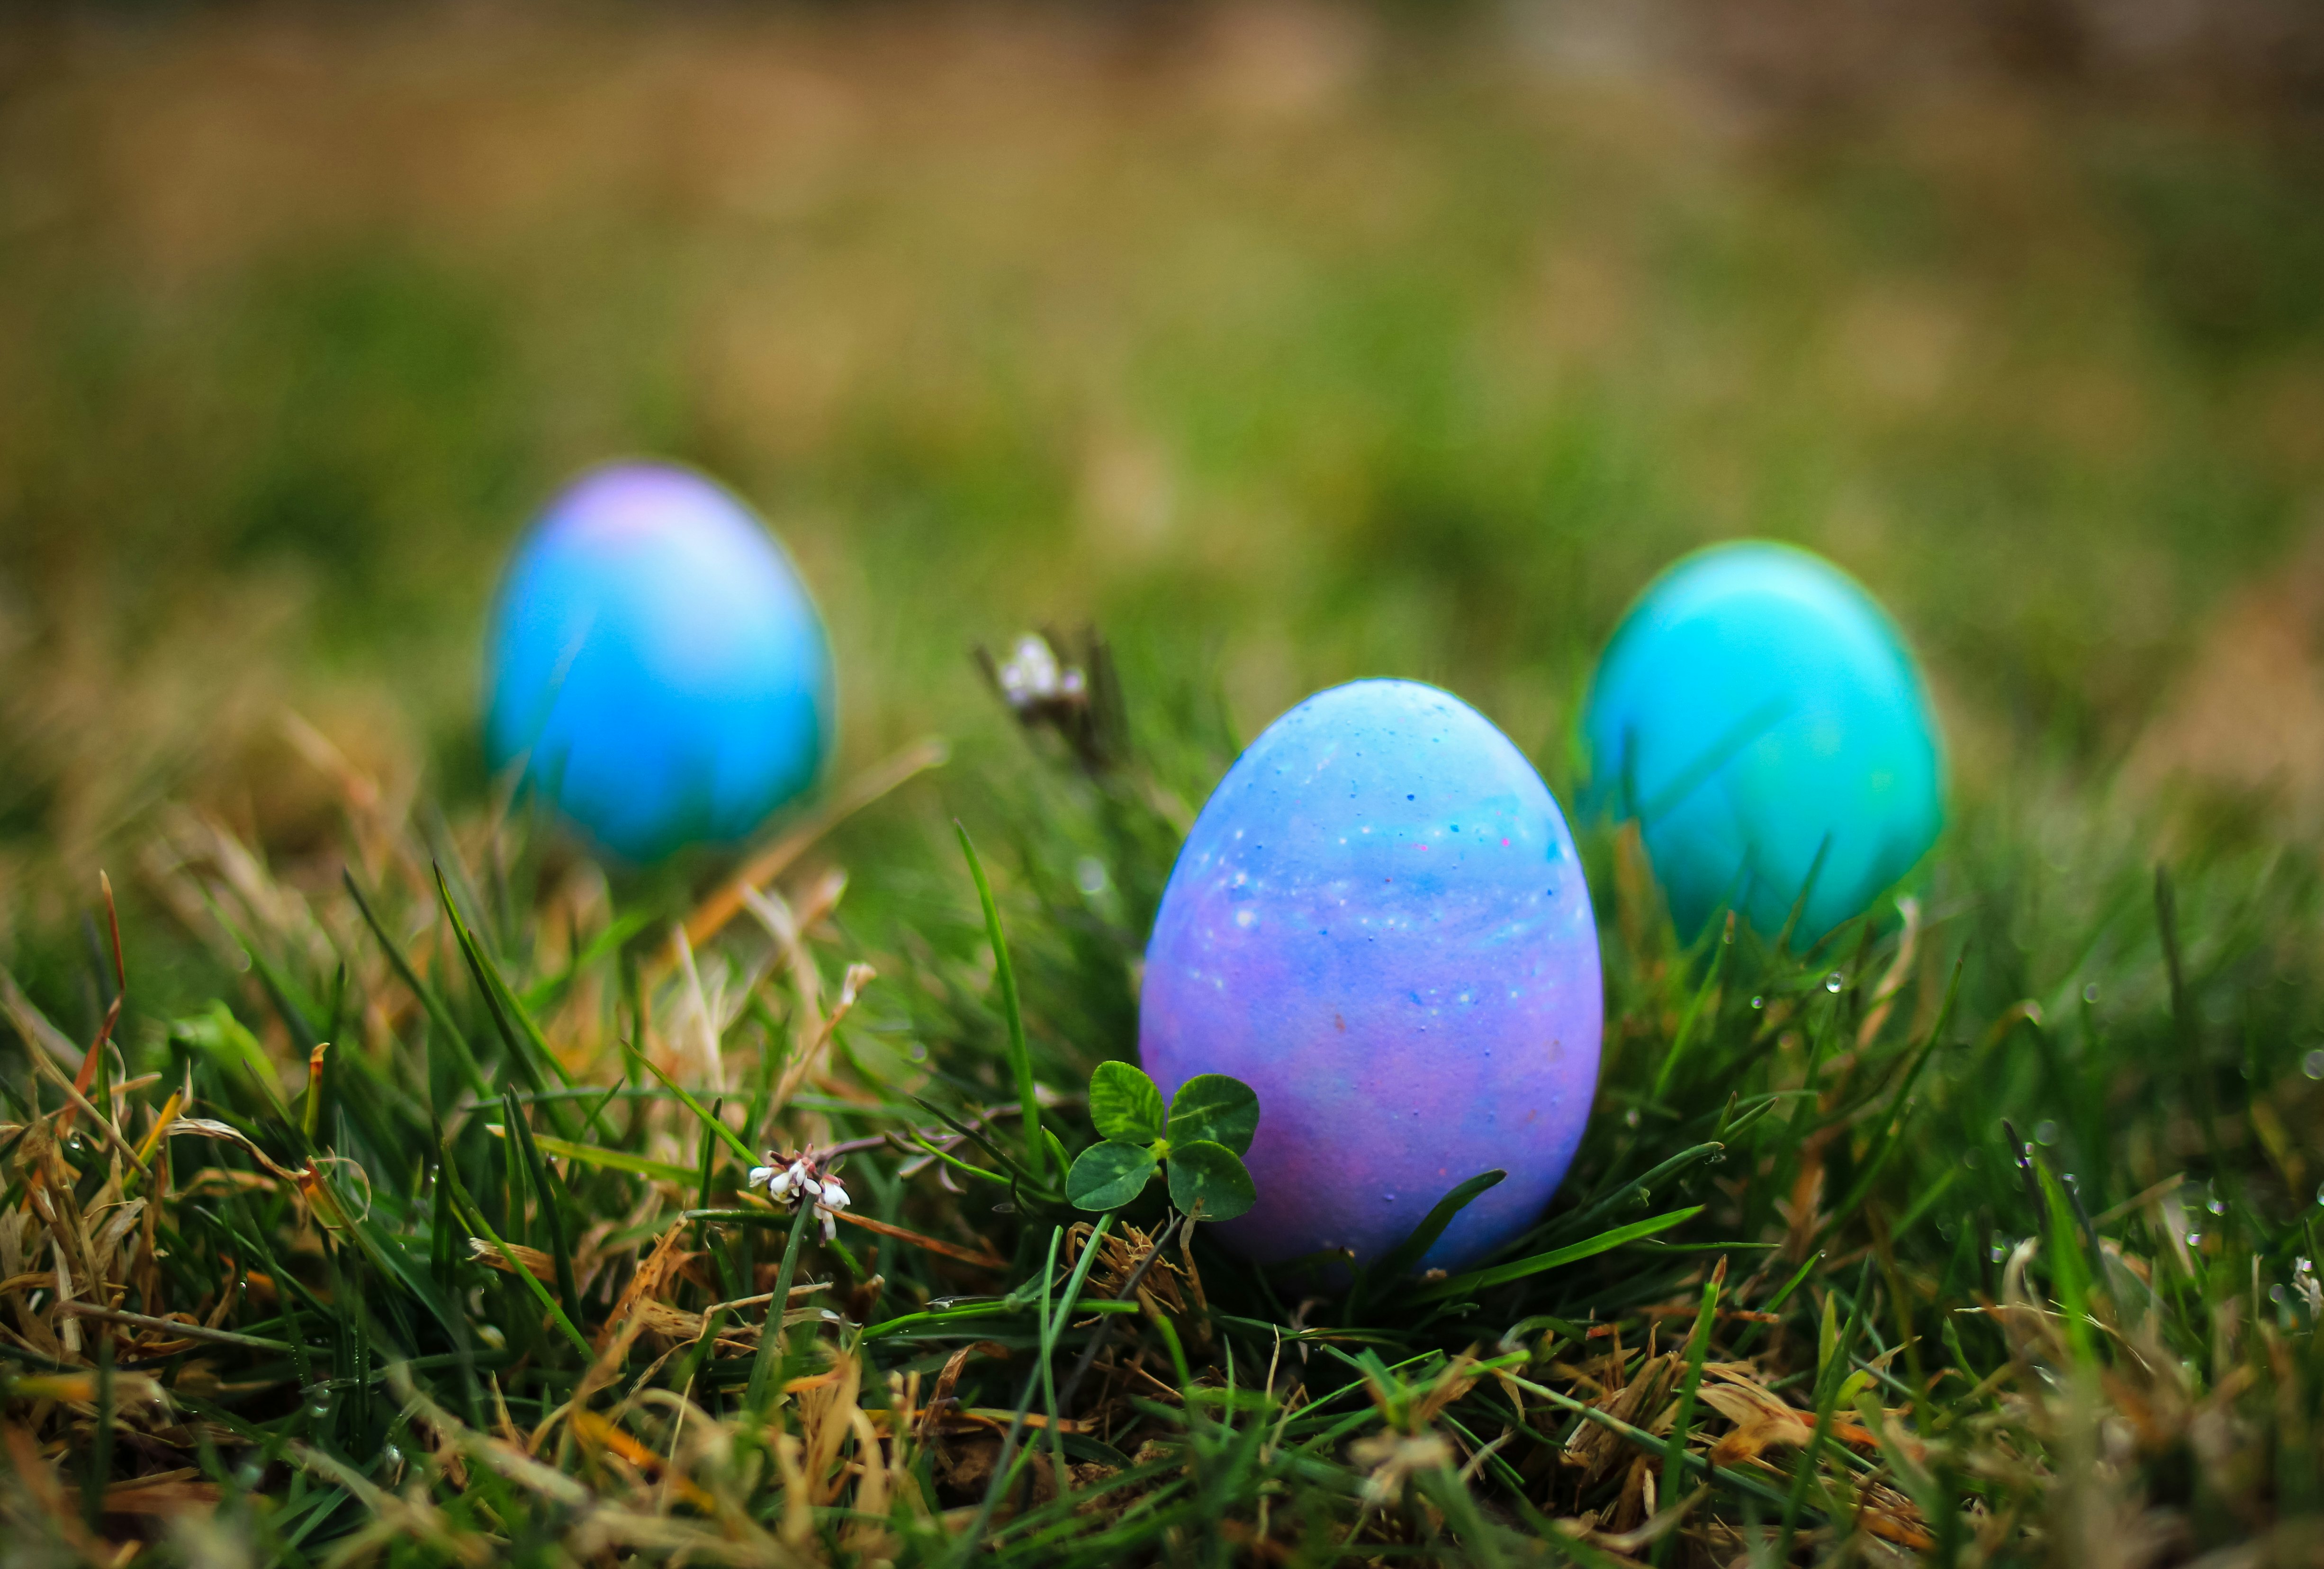 Why Do We Have Easter Egg Hunts? The Tradition Is Centuries-Old